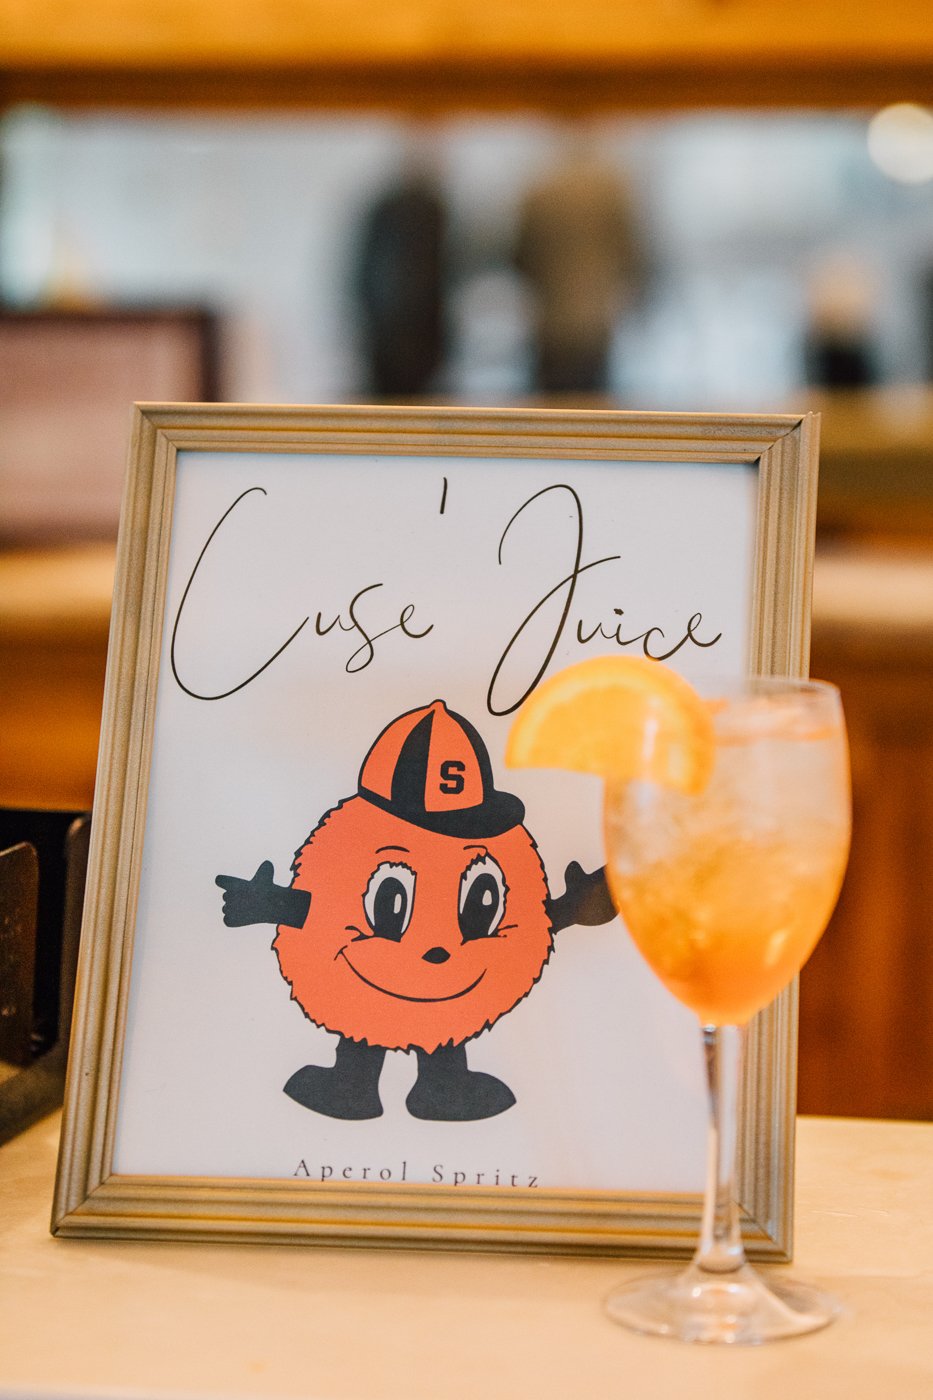  Custom cocktail for a fingerlakes wedding, named after the Syracuse University mascot, Otto 